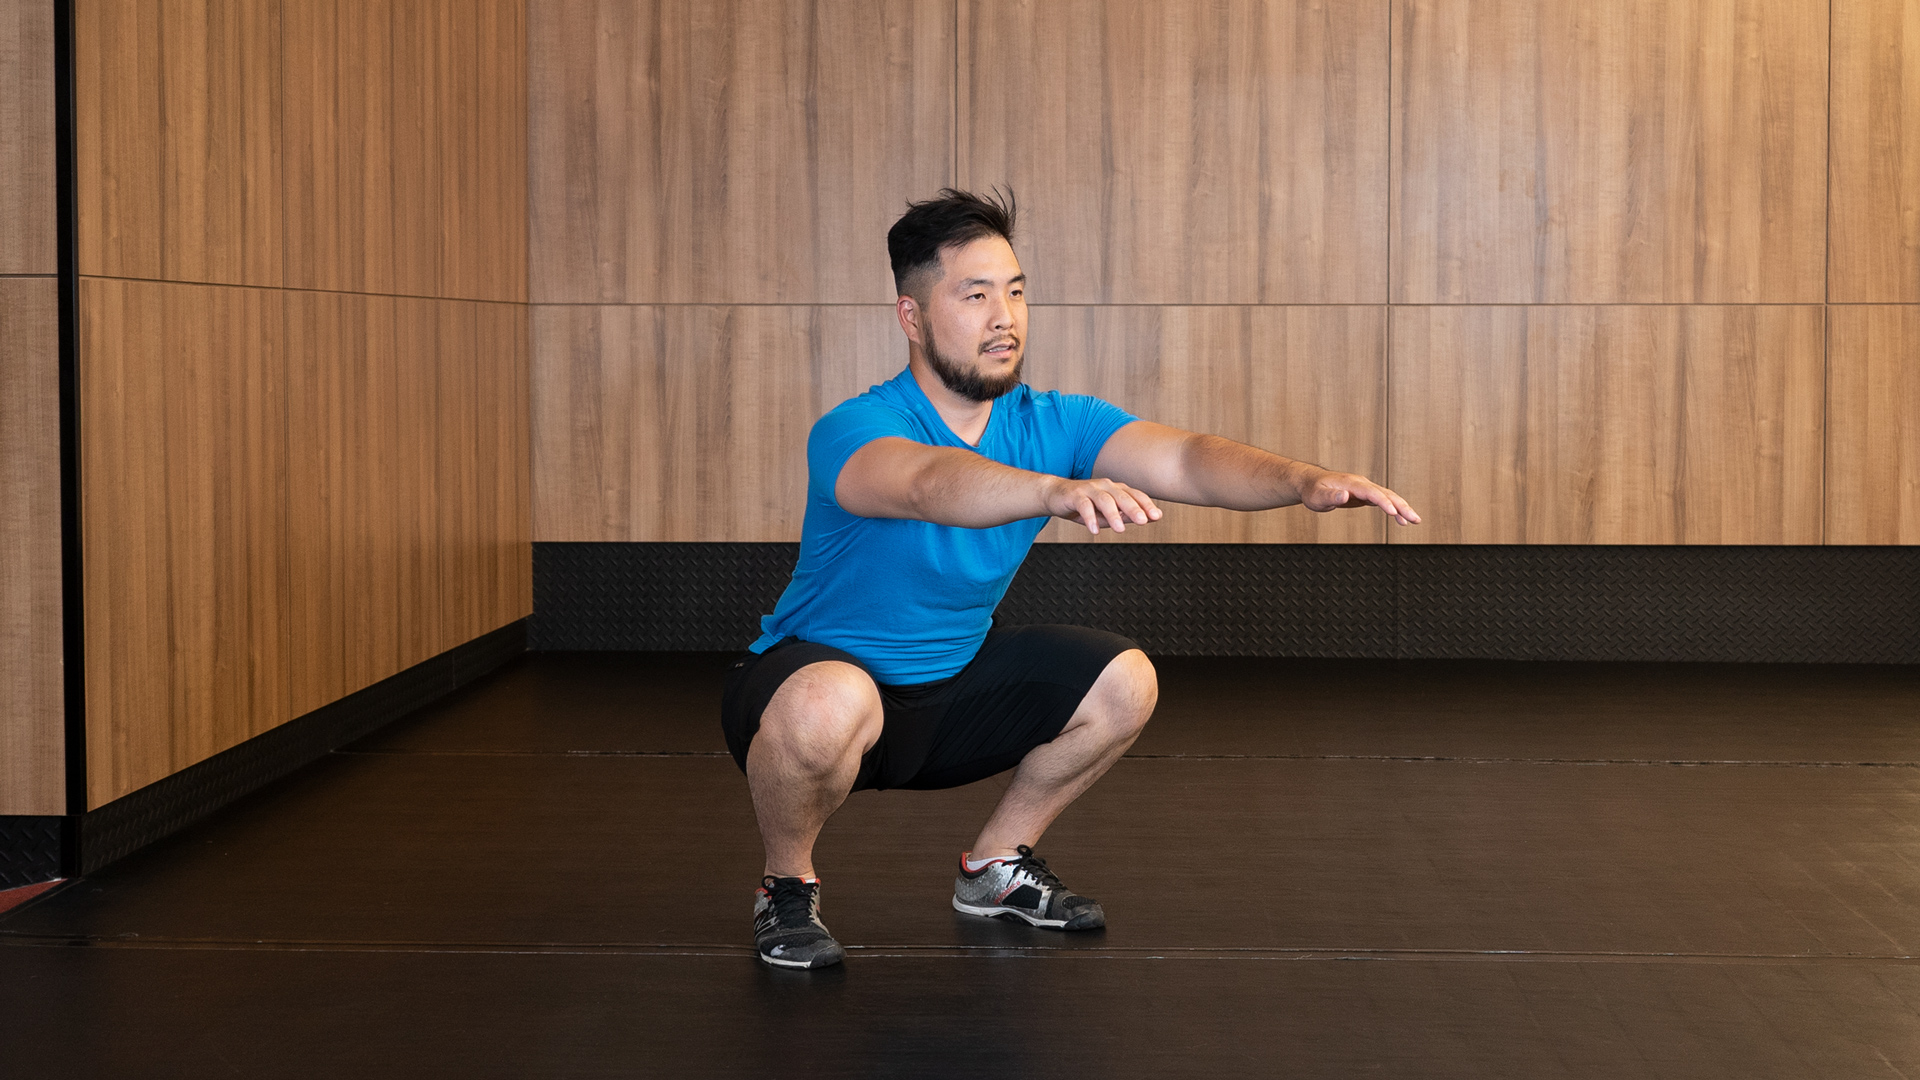 No equipment pyramid workout | The GoodLife Fitness Blog